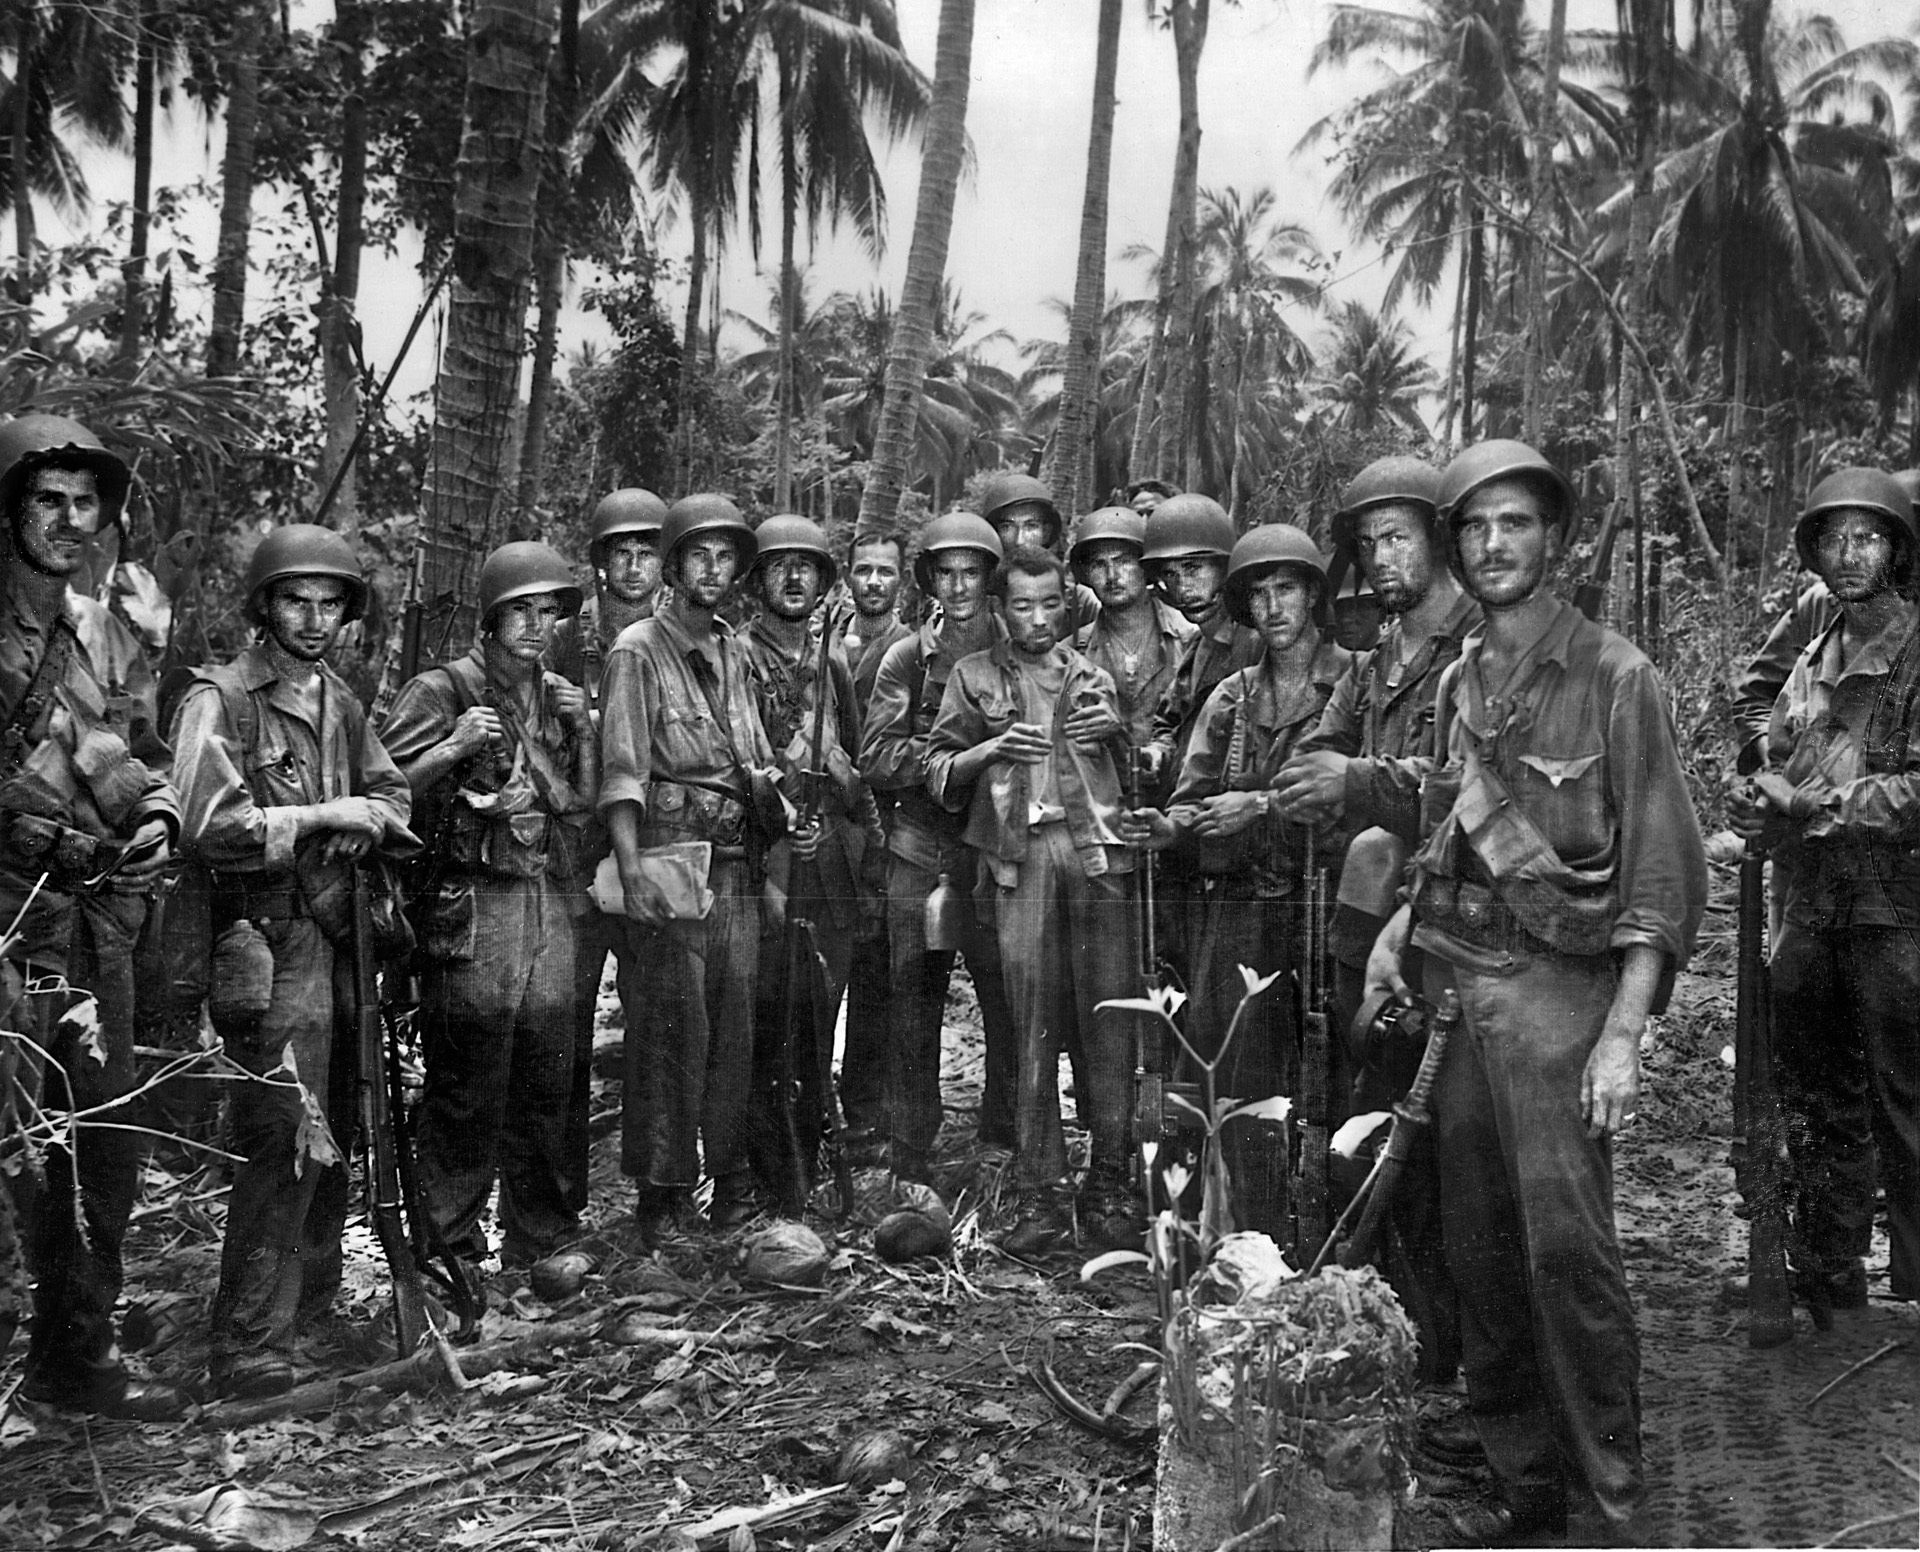 After completing a reconnaissance mission in the jungles of Guadalcanal, a group of U.S. Marines poses for a photographer while delivering a Japanese prisoner for interrogation. The Marine at right has taken a Japanese sword as a souvenir. Prisoners were rarely taken in the Pacific, as Japanese soldiers preferred suicide to captivity.